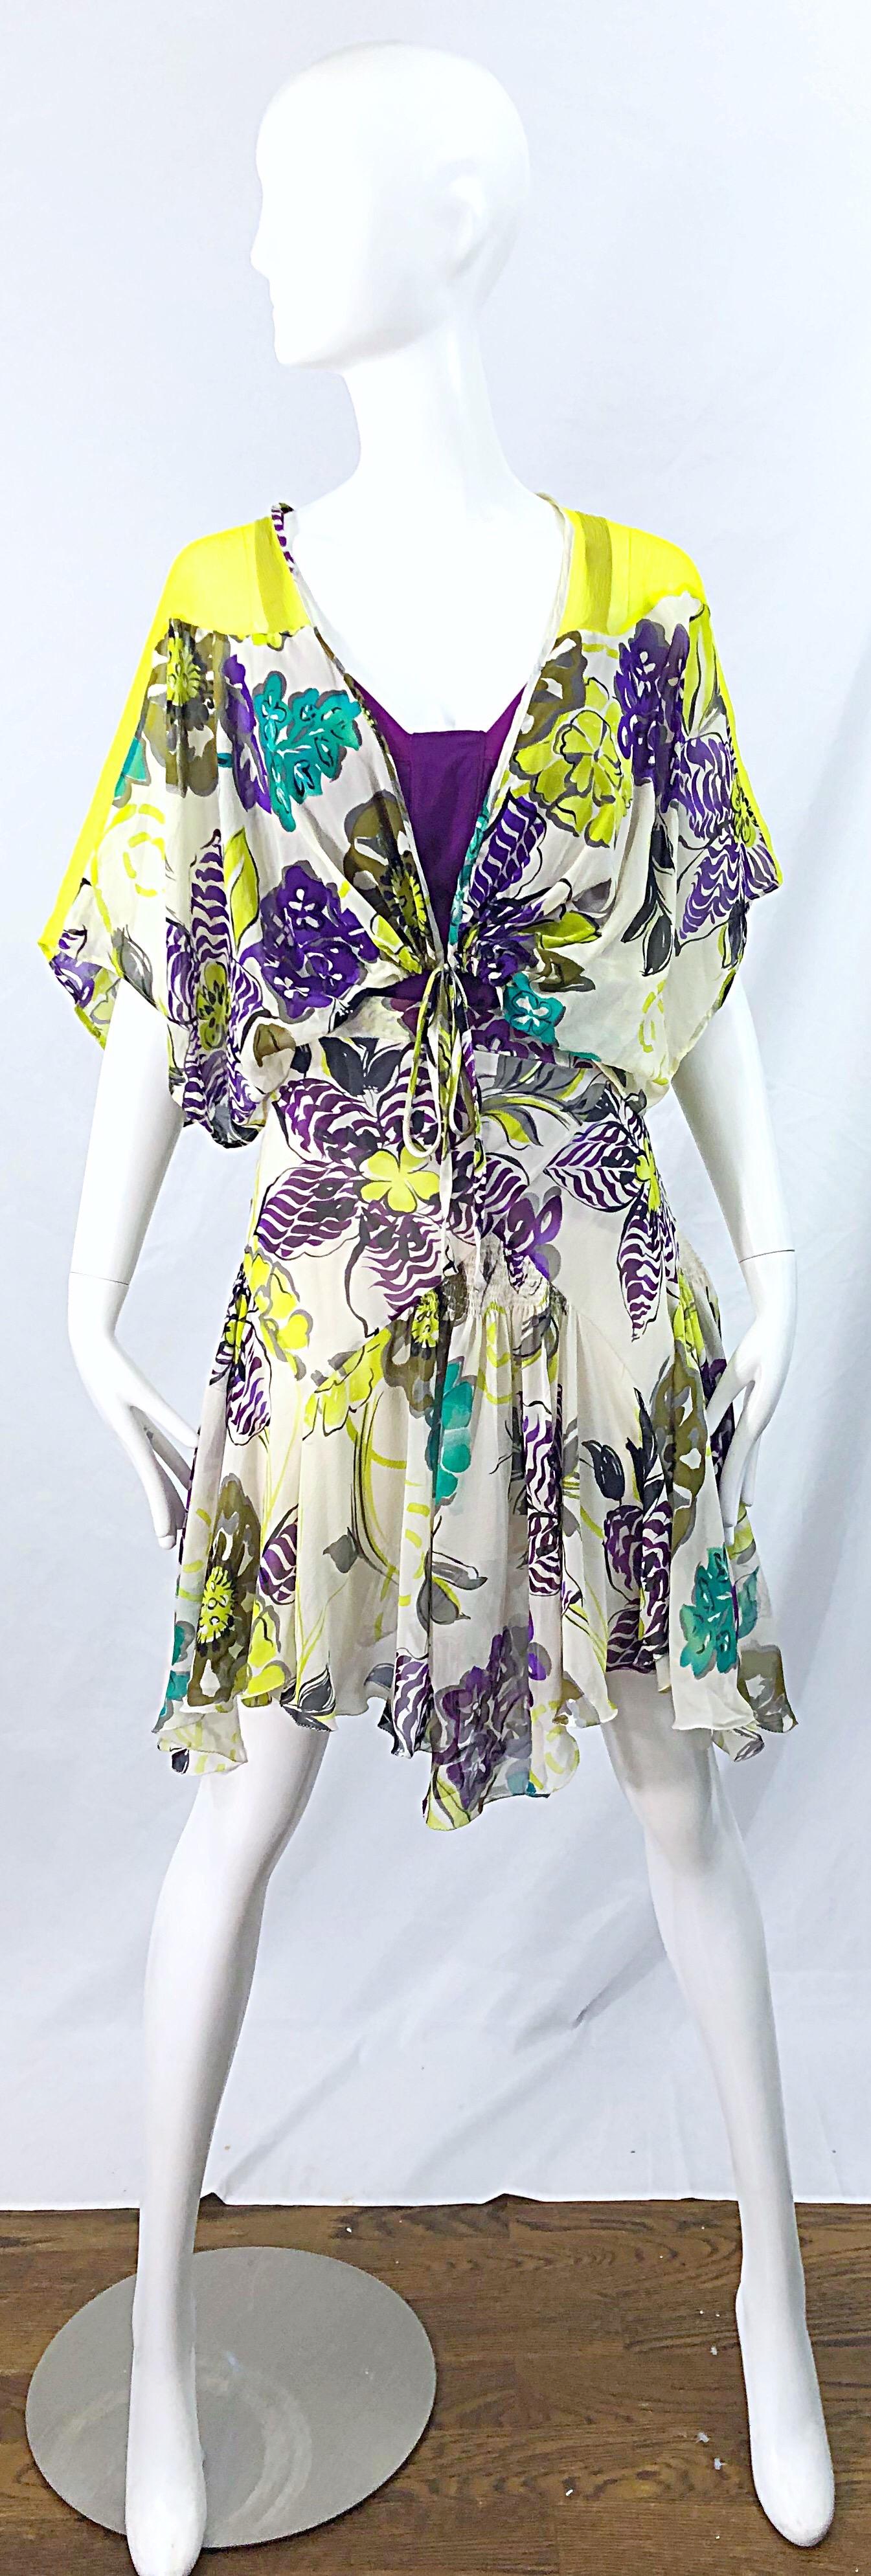 New with tags early 2000s ETRO silk chiffon three piece ensemble ! Features bright colors of neon yellow, green, purple and cream throughout. Purple silk top simply slips over the head. Semi sheer chiffon bolero has dolman sleeves and ties at center